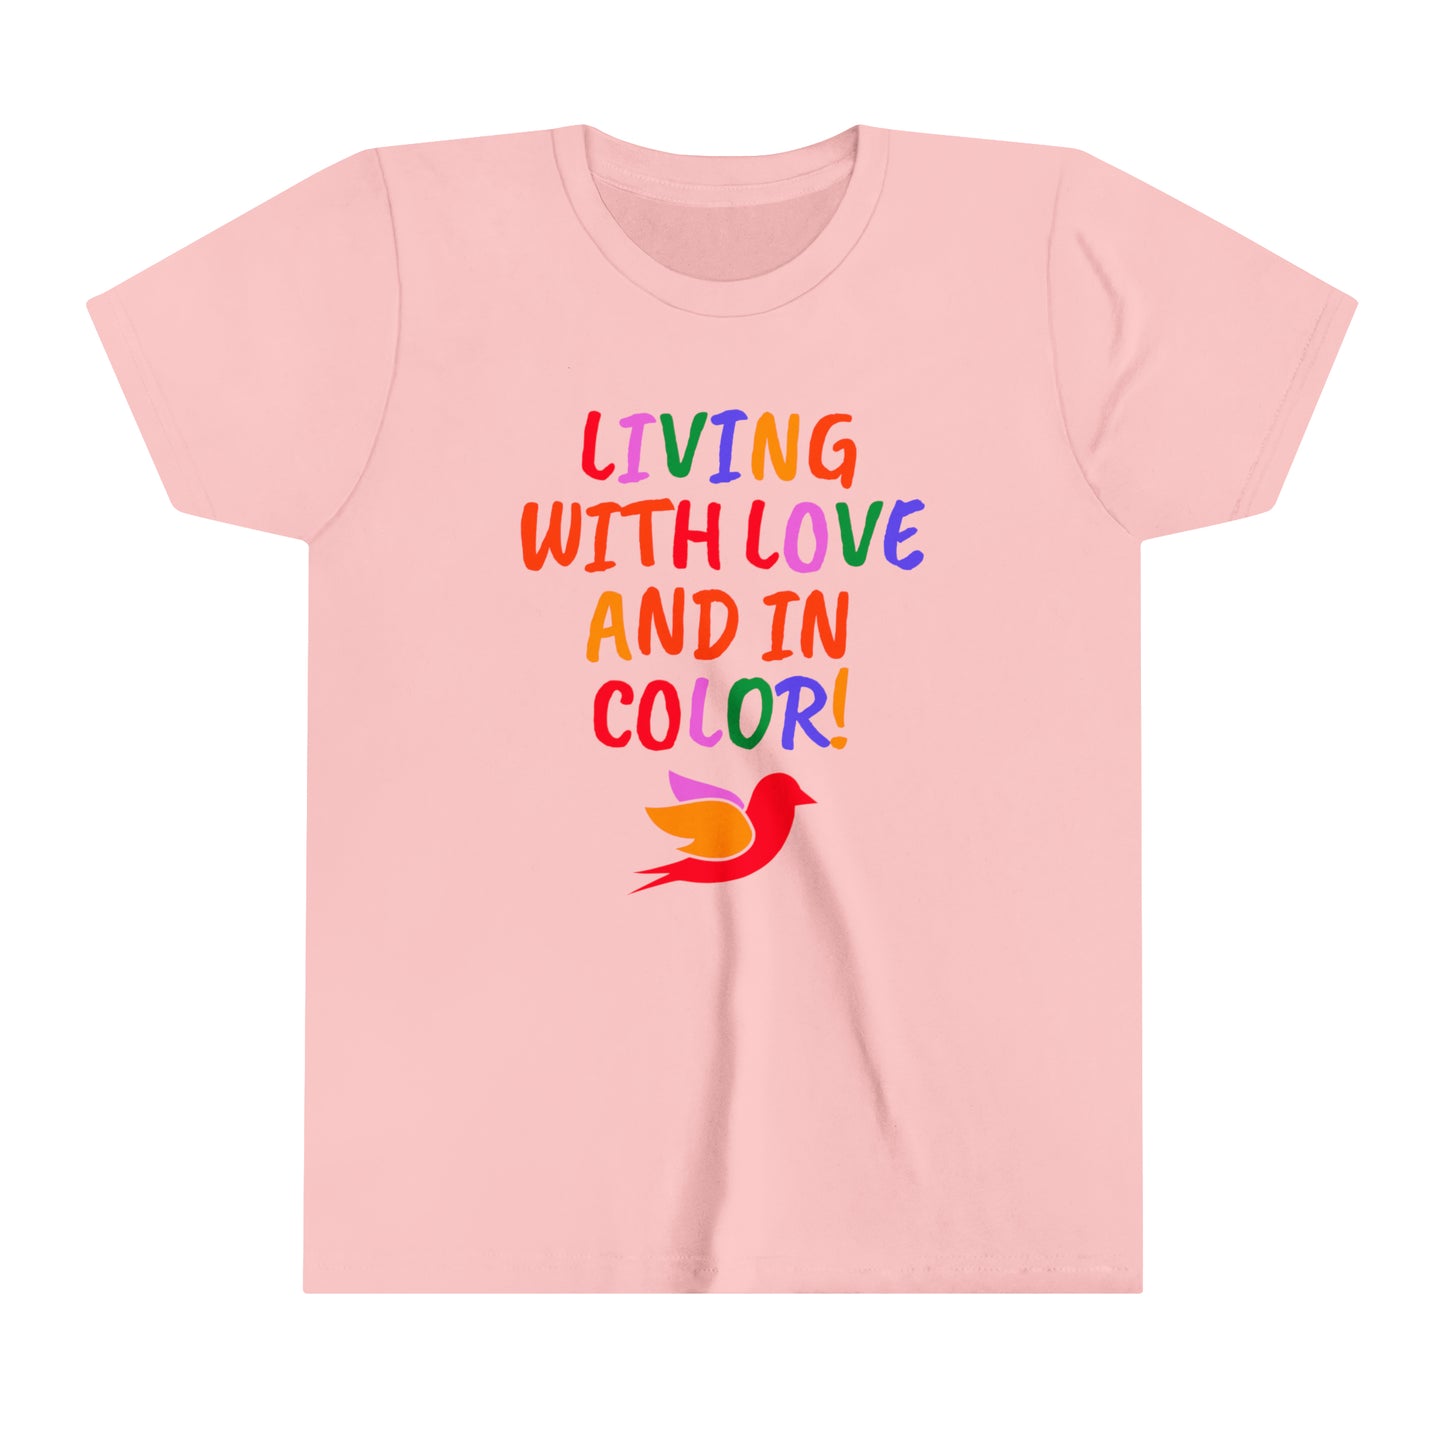 Love & Color Youth Short Sleeve Tee (10 colors)